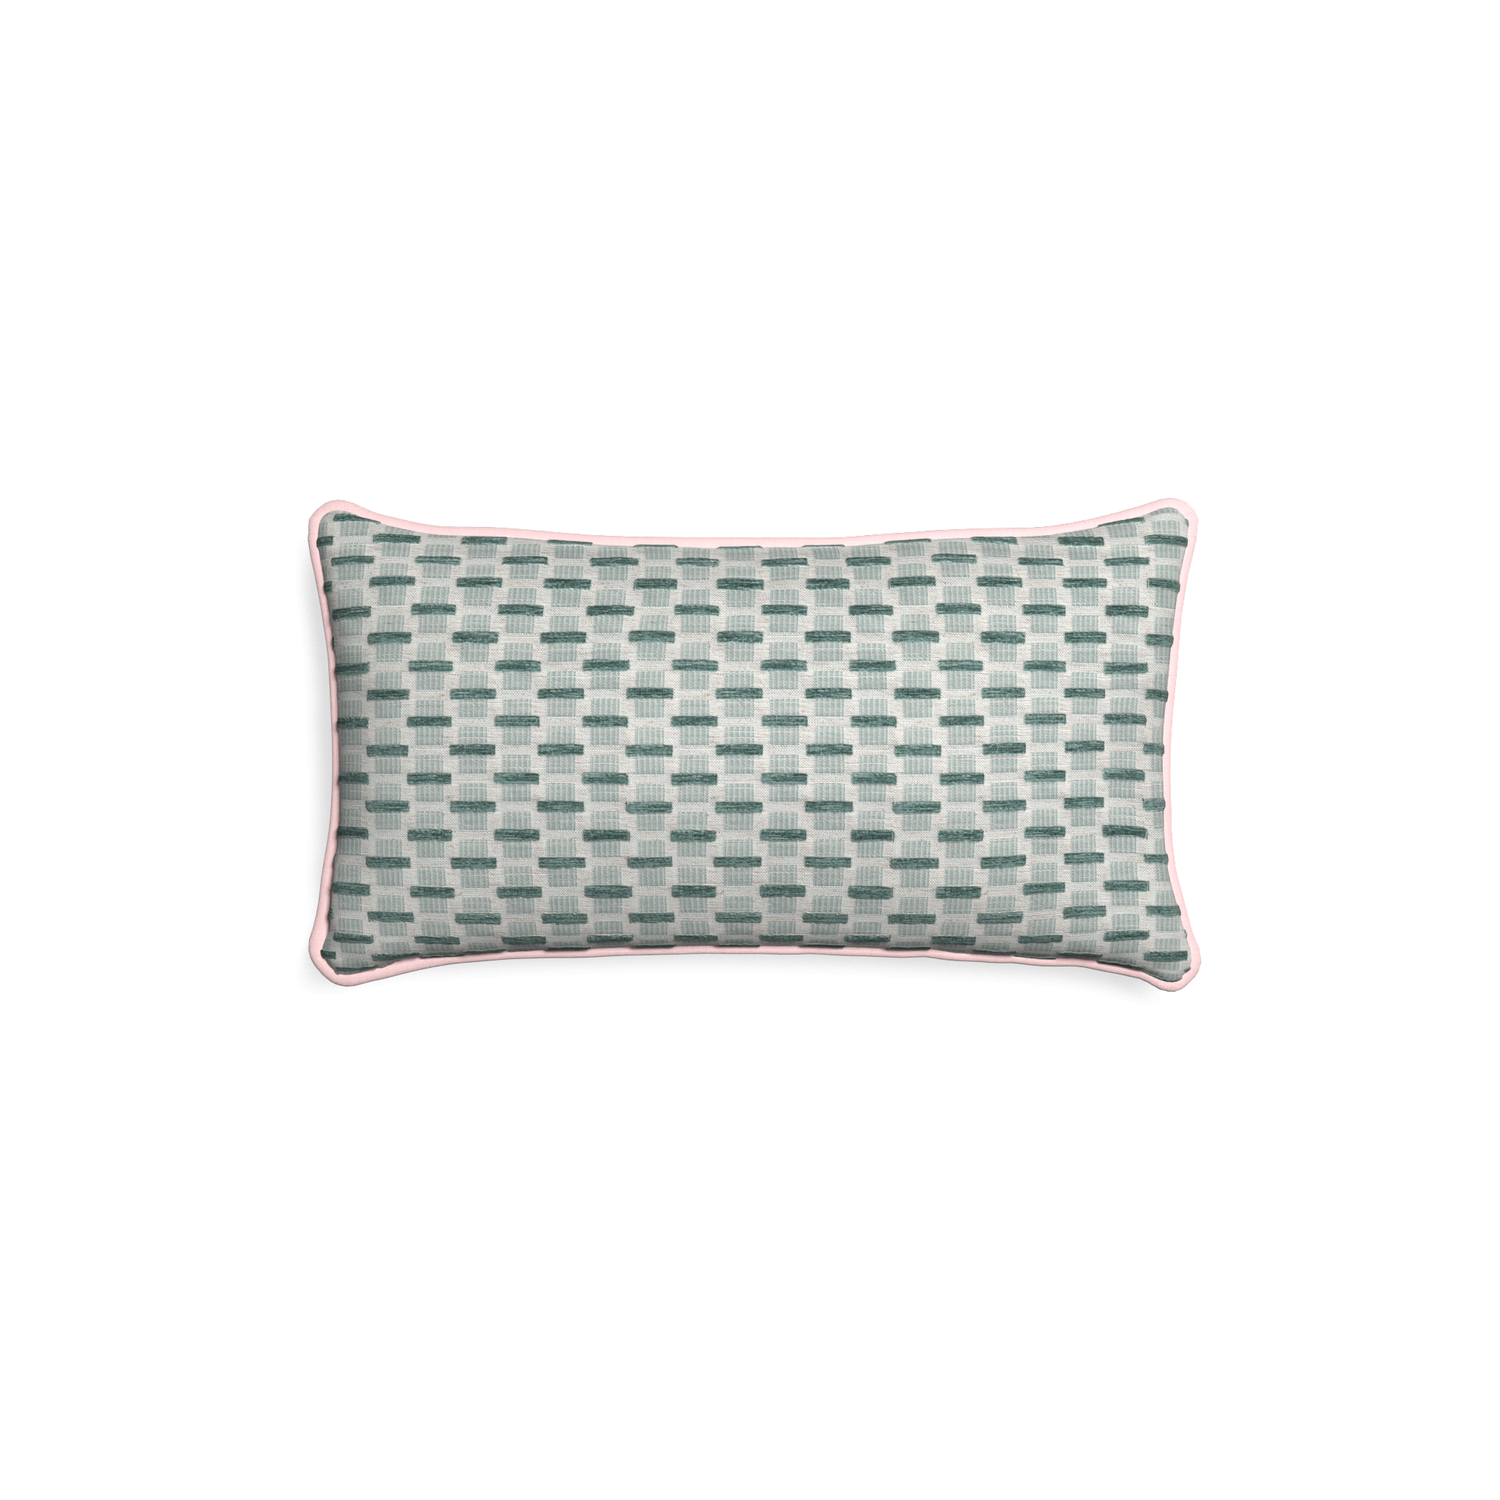 Petite-lumbar willow mint custom green geometric chenillepillow with petal piping on white background